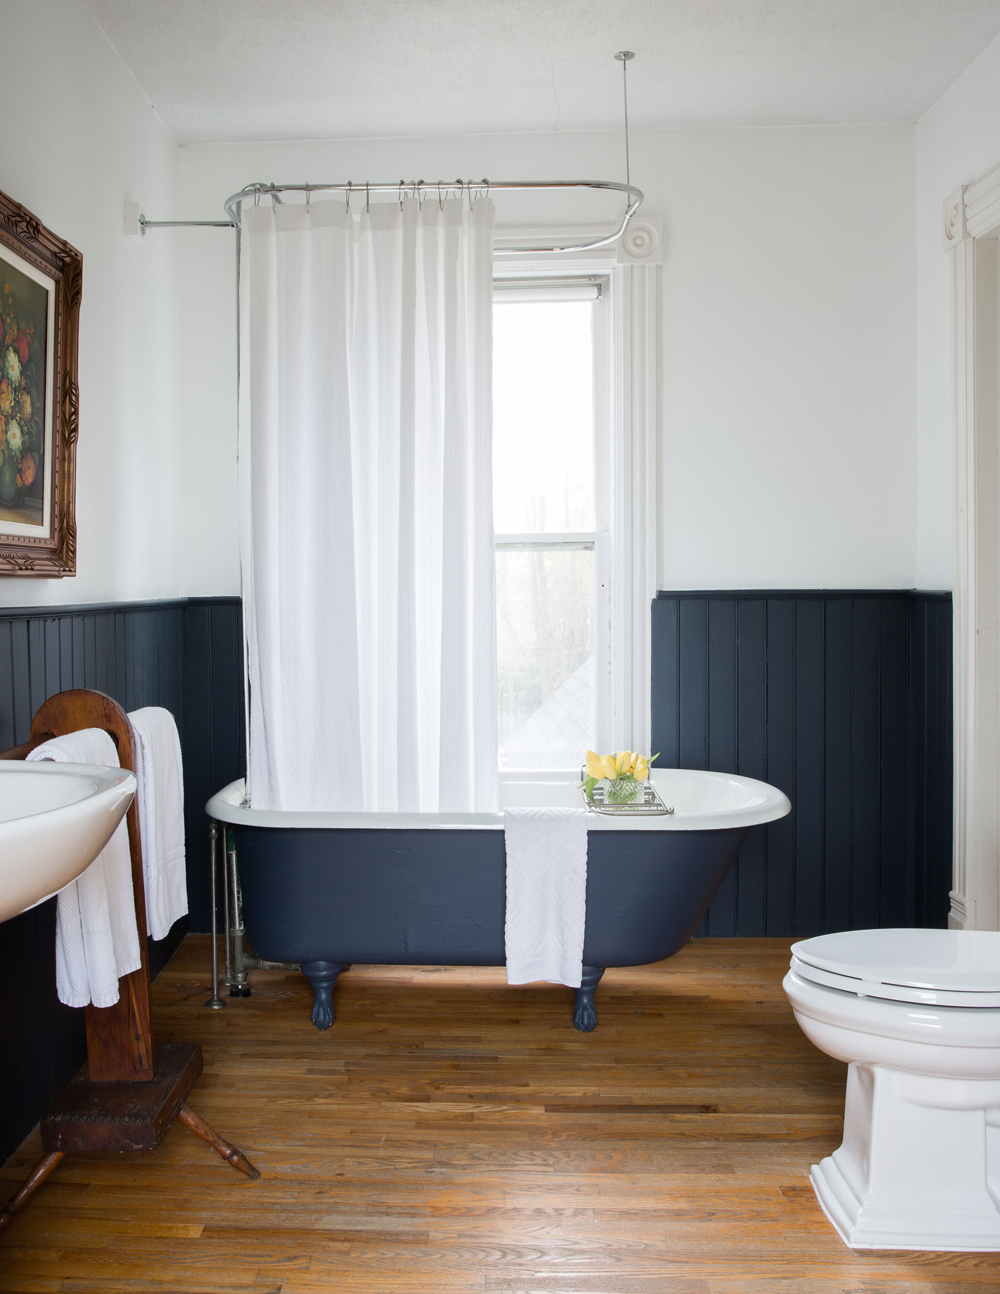 A bathroom painted in midnight blue with a clawfoot tub and shower with exposed pipes